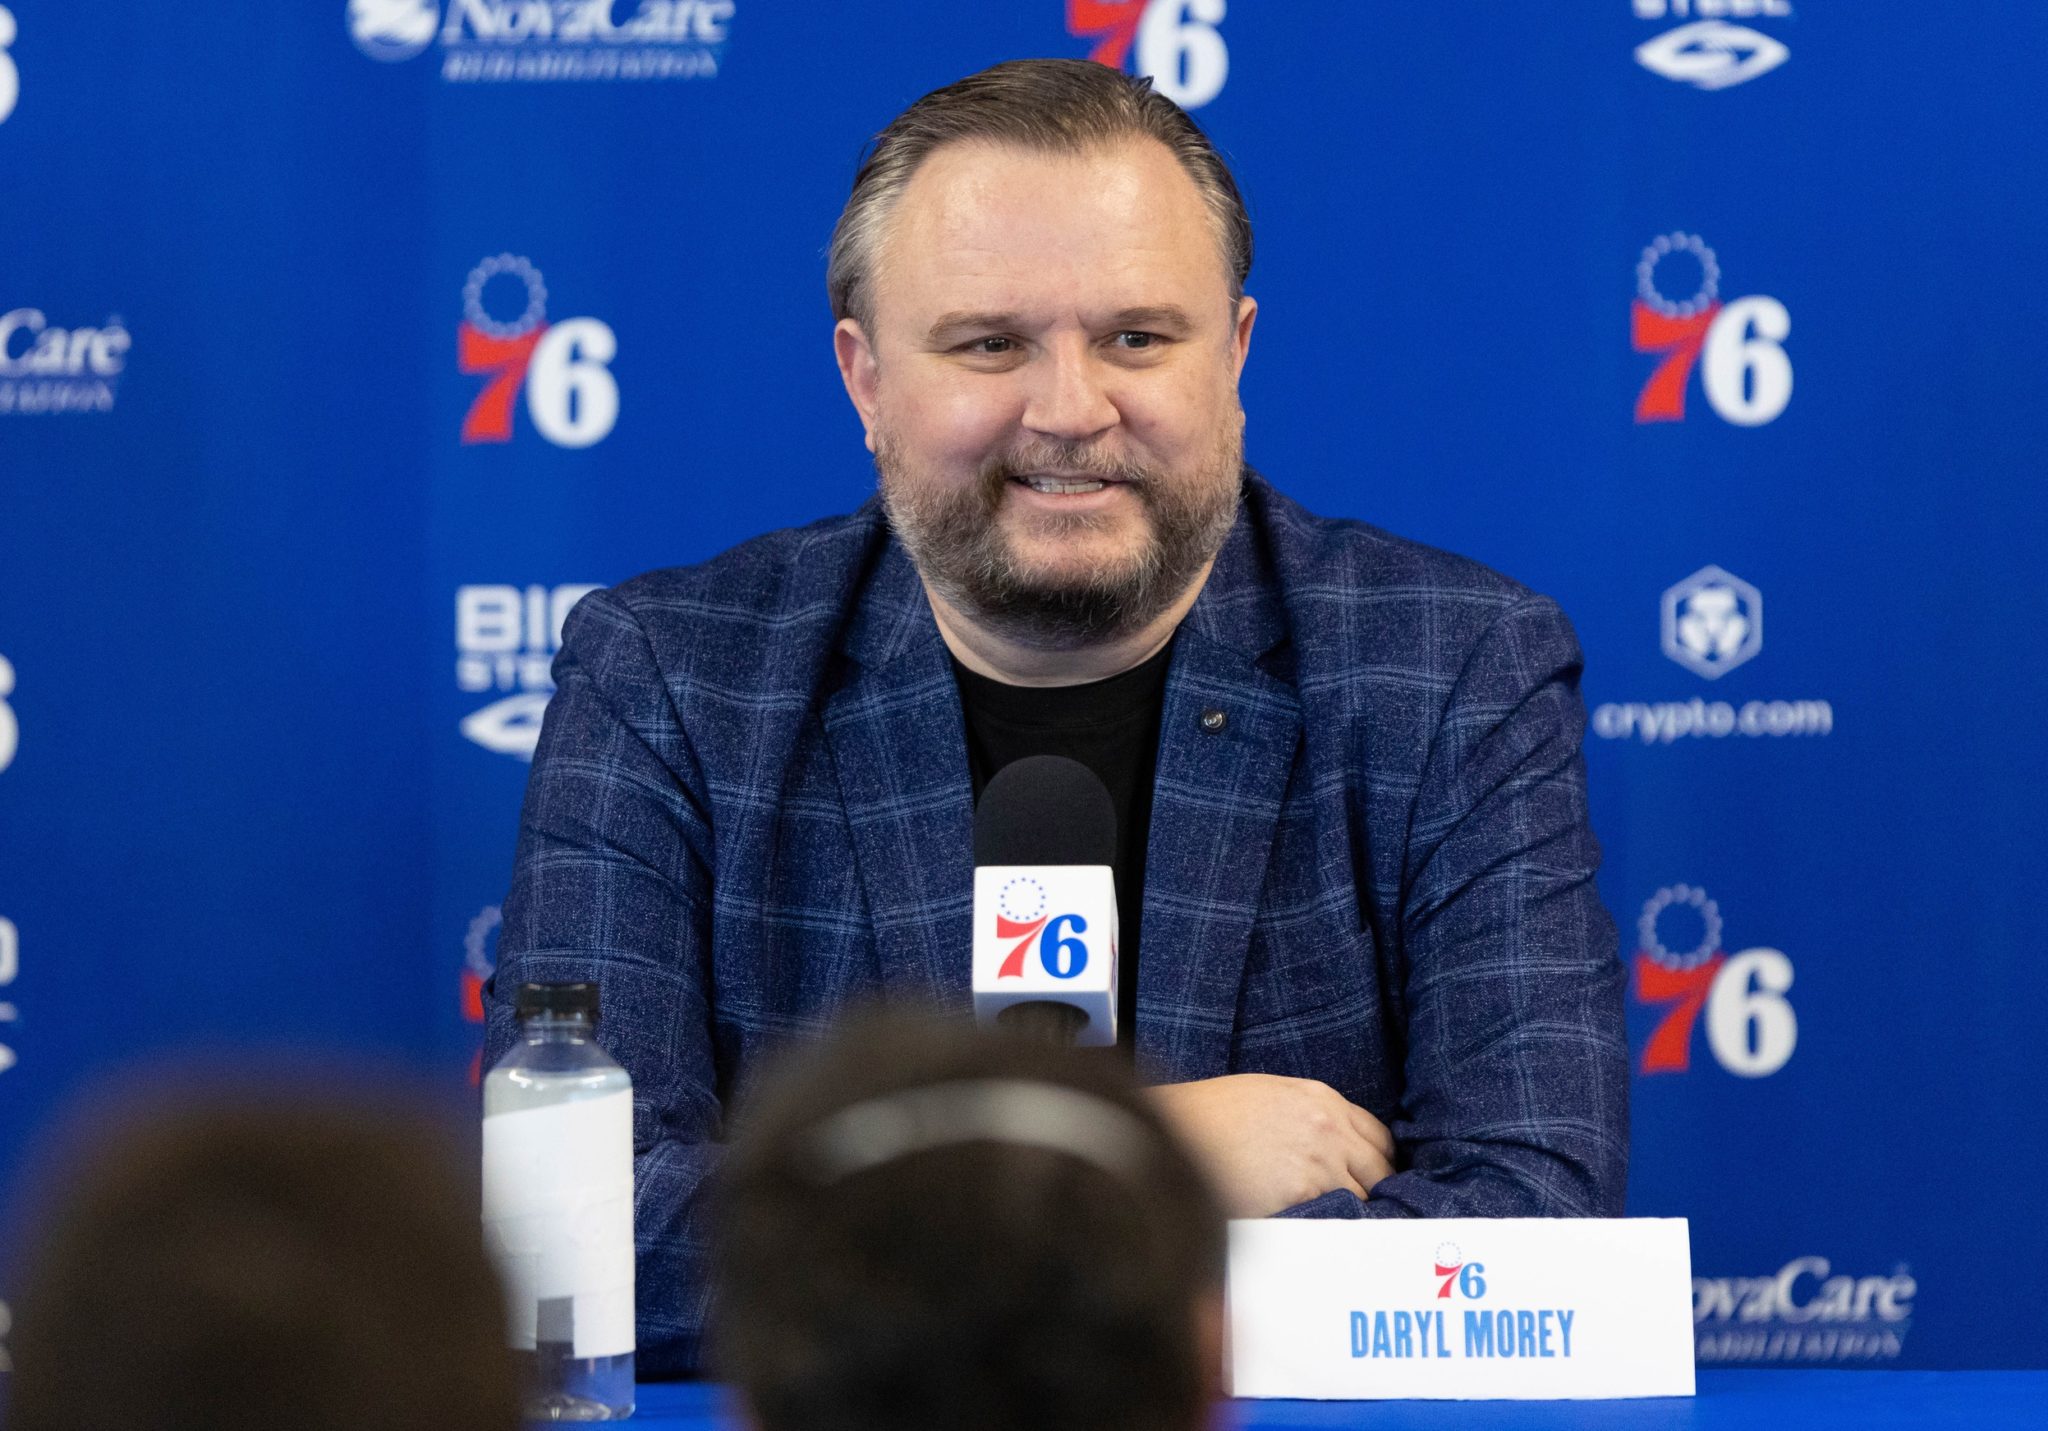 Red-Blooded American Daryl Morey is One of Us